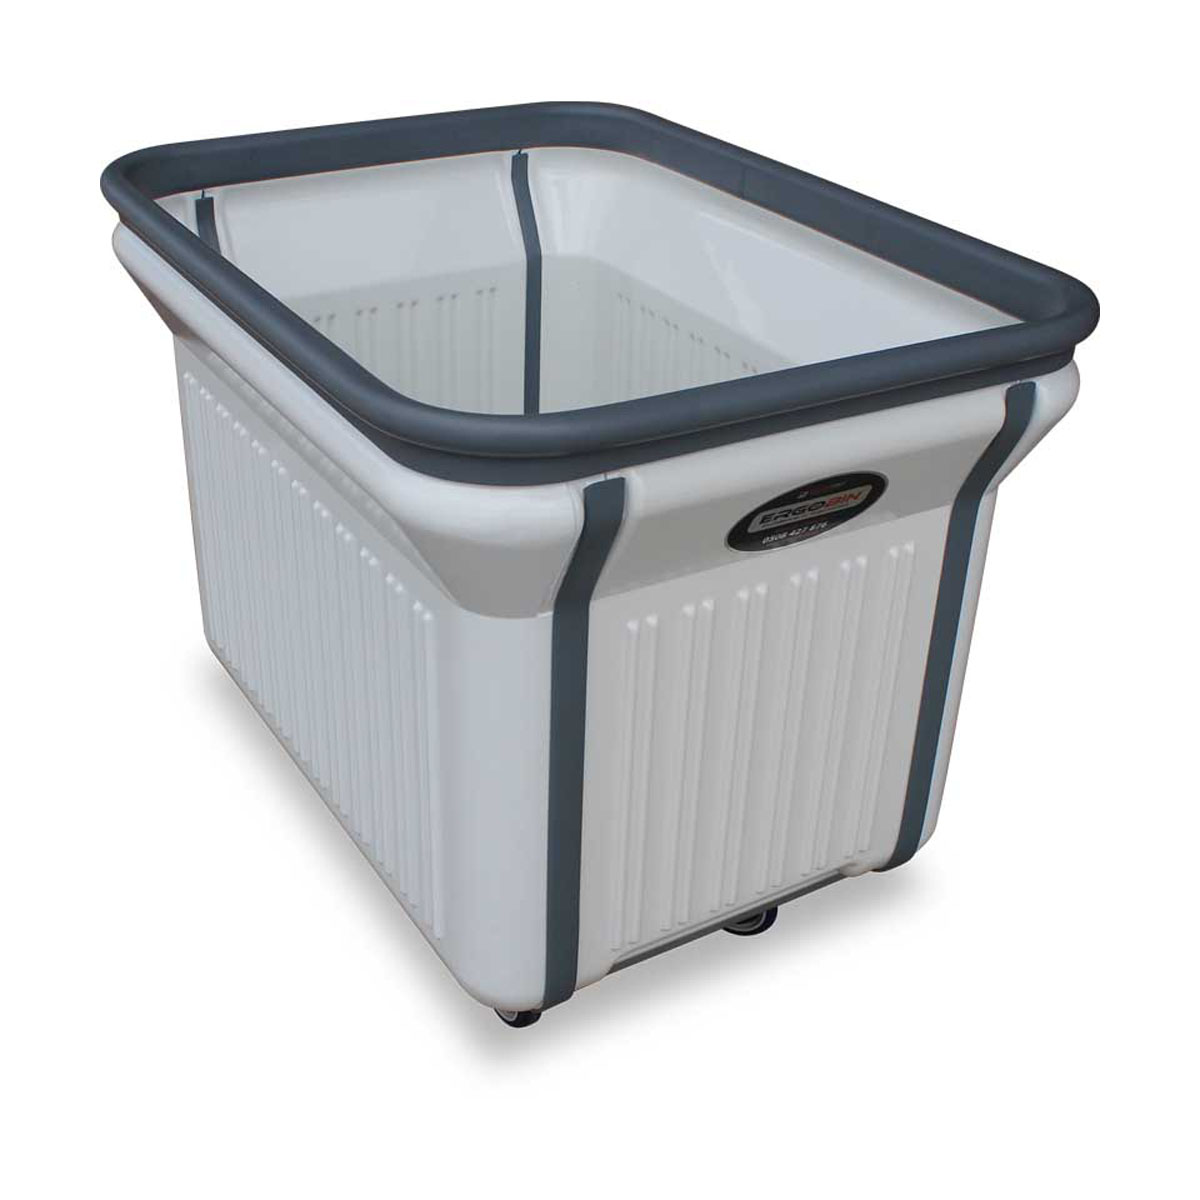 Large Commercial Use Laundry Bin